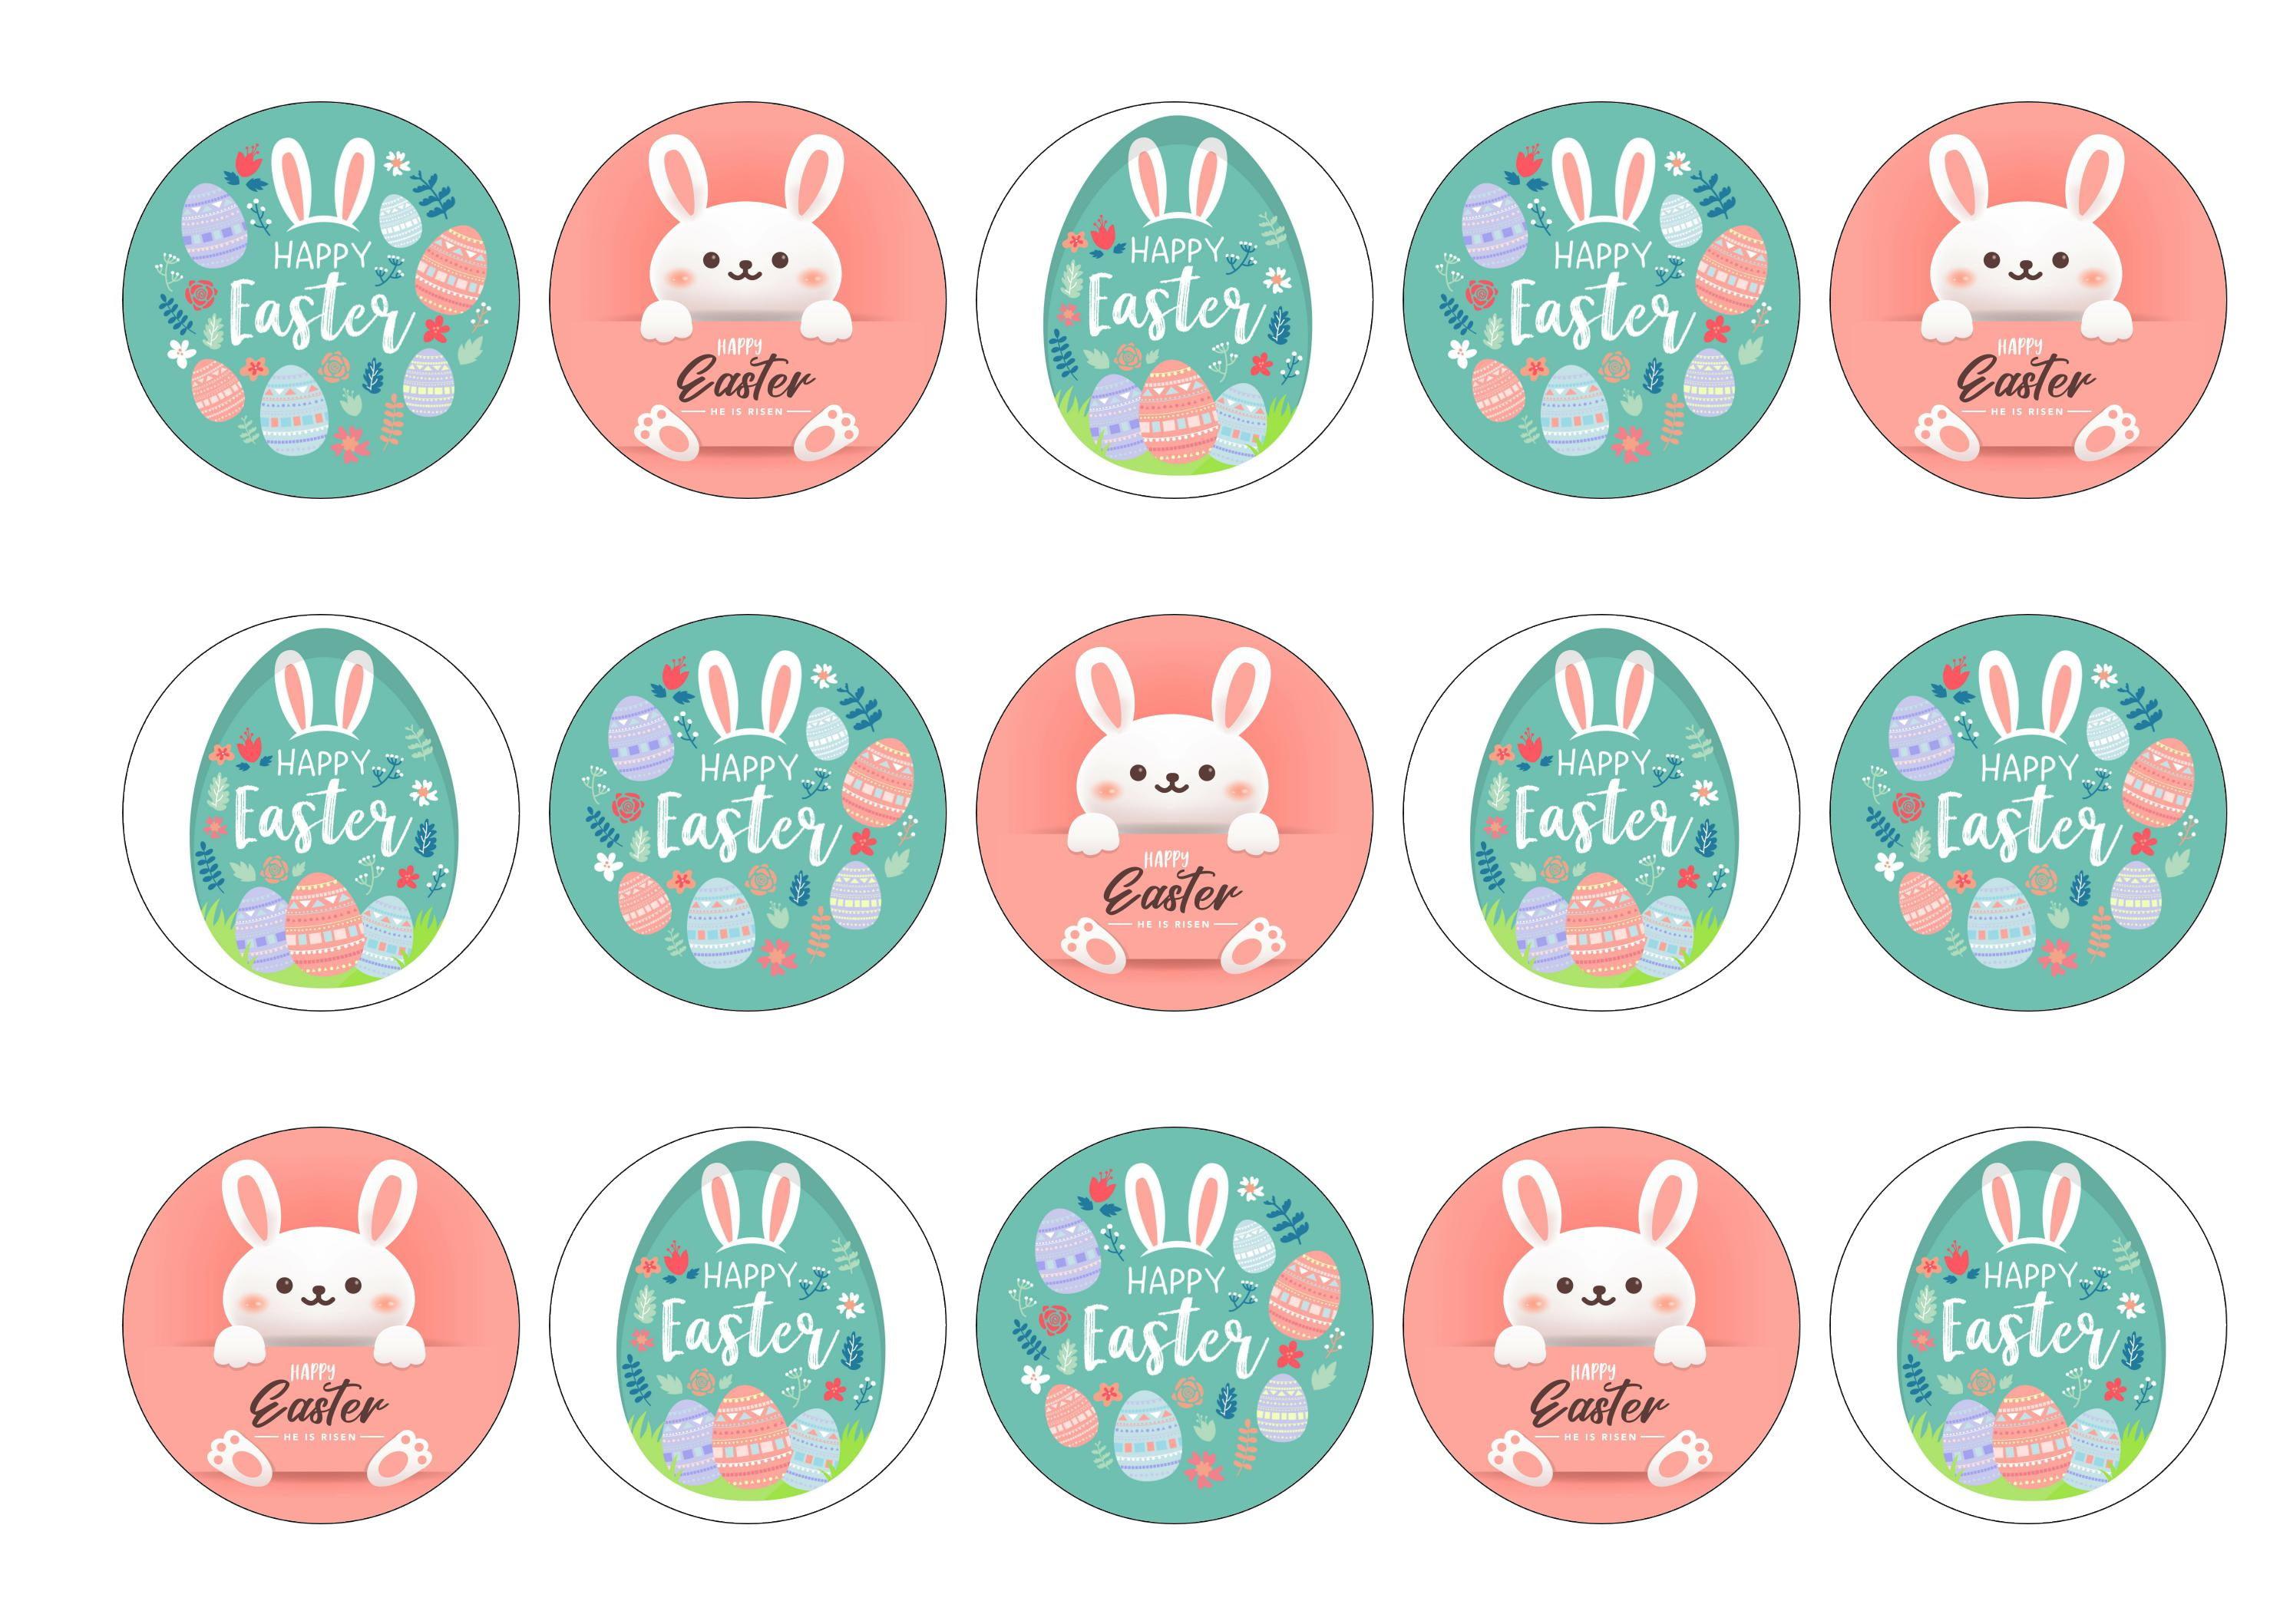 15 printed cupcake toppers with a cute Easter Bunny and Easter Eggs